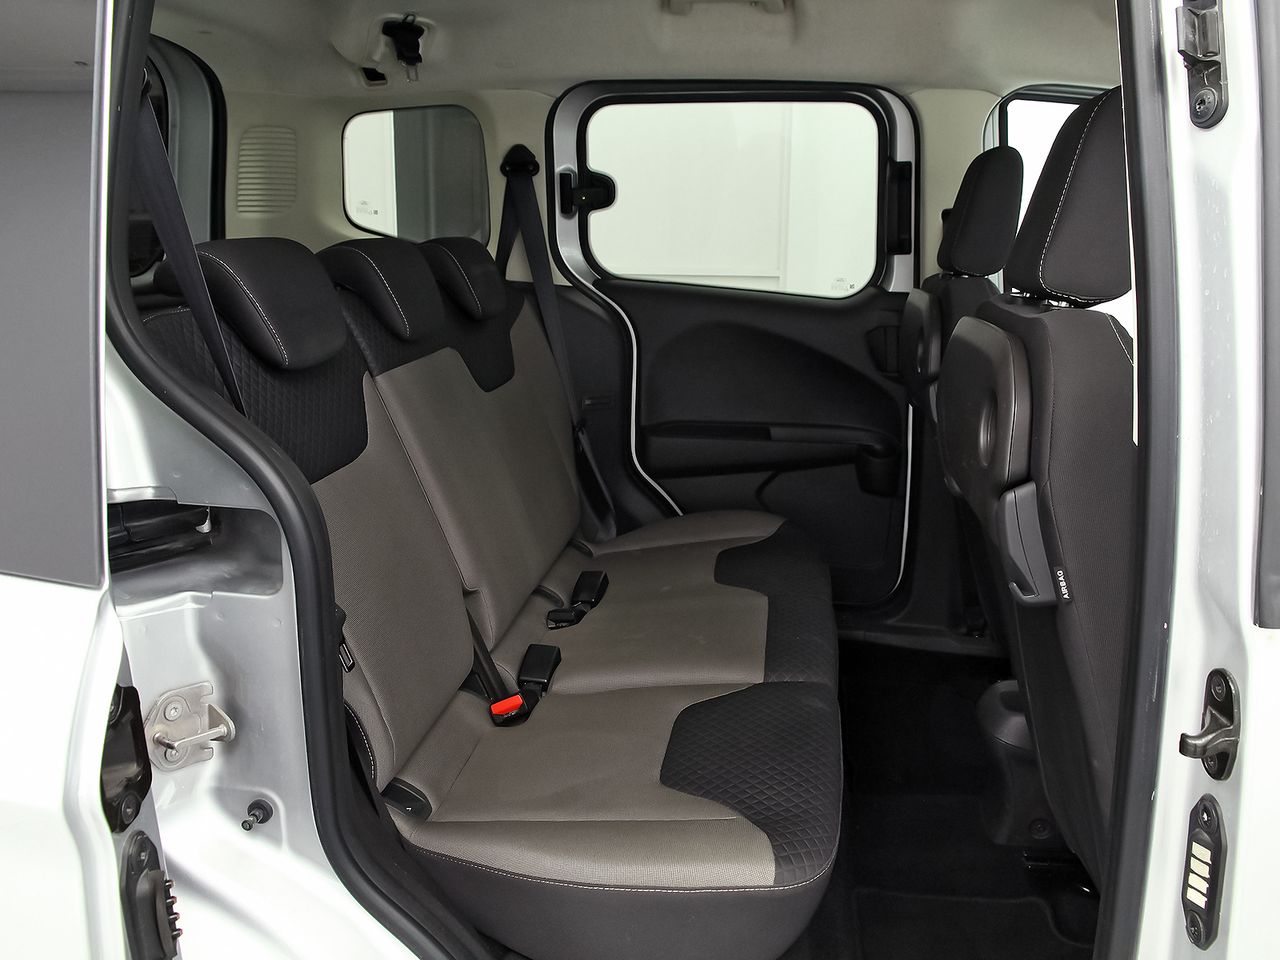 Foto Ford Tourneo Courier 8